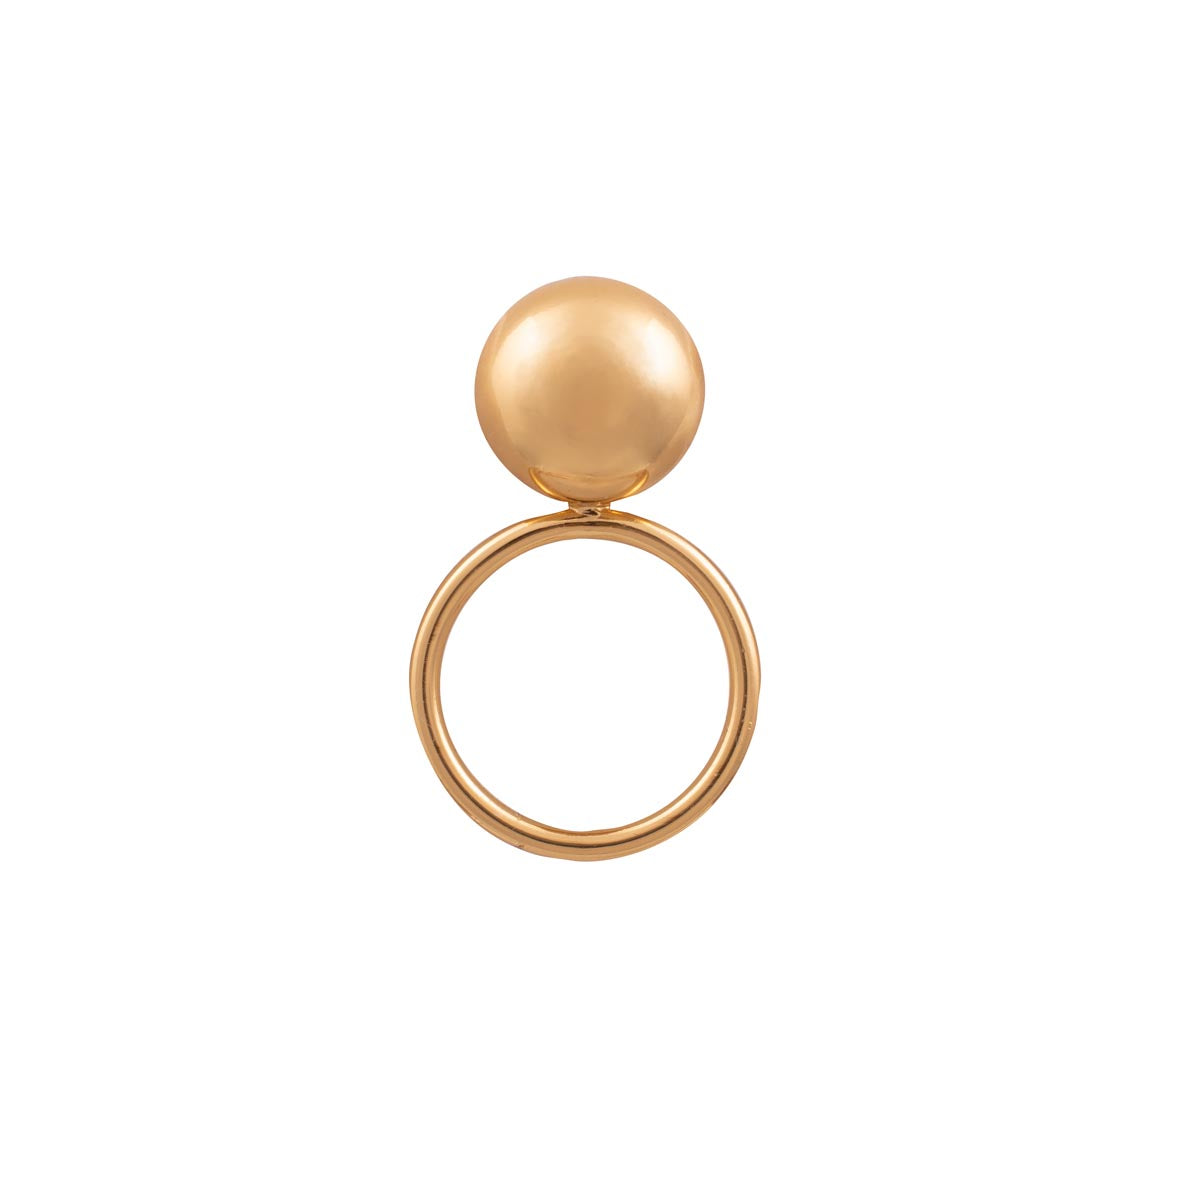 Passion Big Ball ring, gold-plated silver